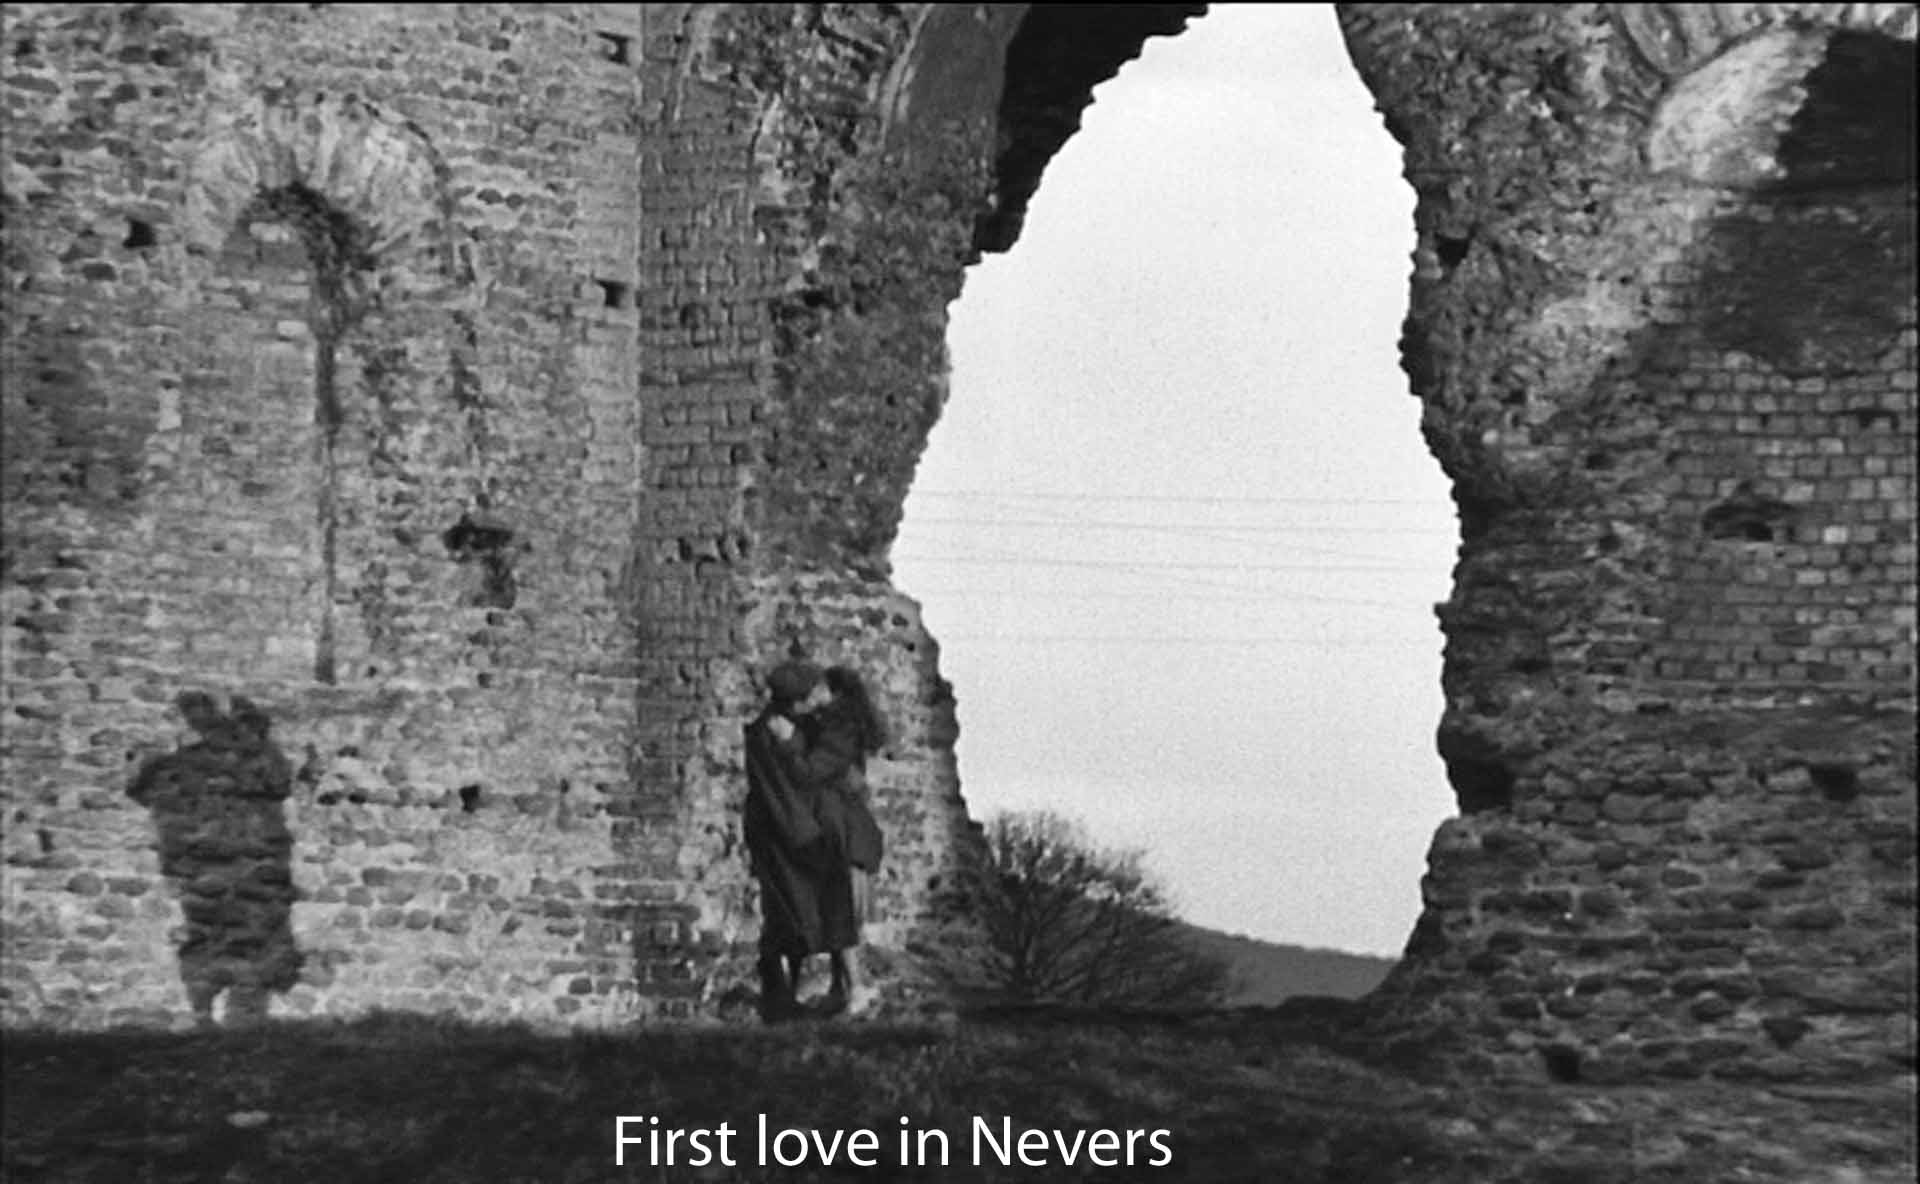 First love in Nevers